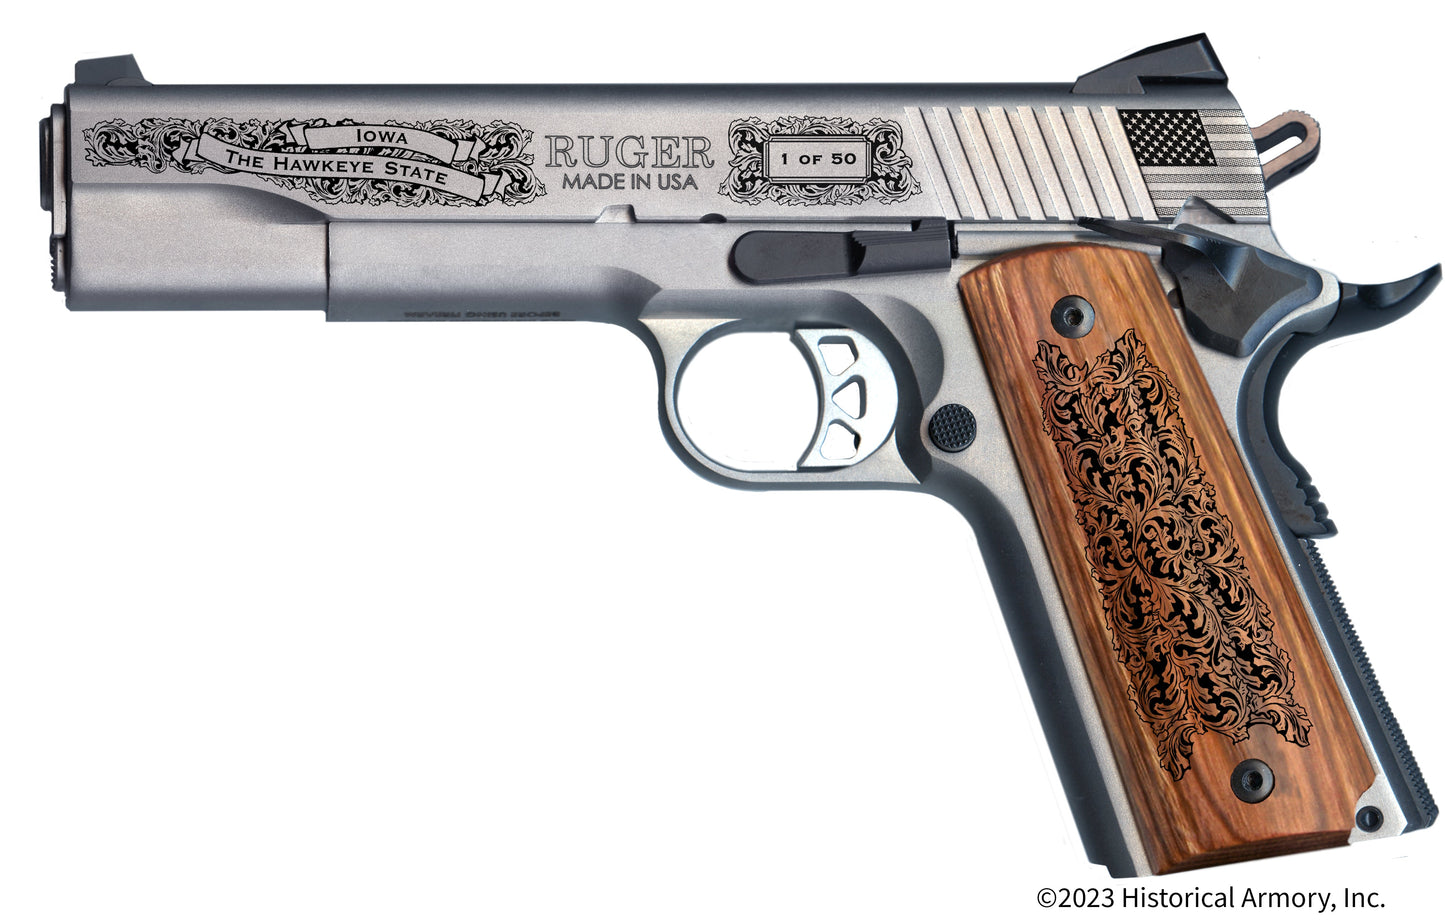 Buchanan County Iowa Engraved .45 Auto Ruger 1911